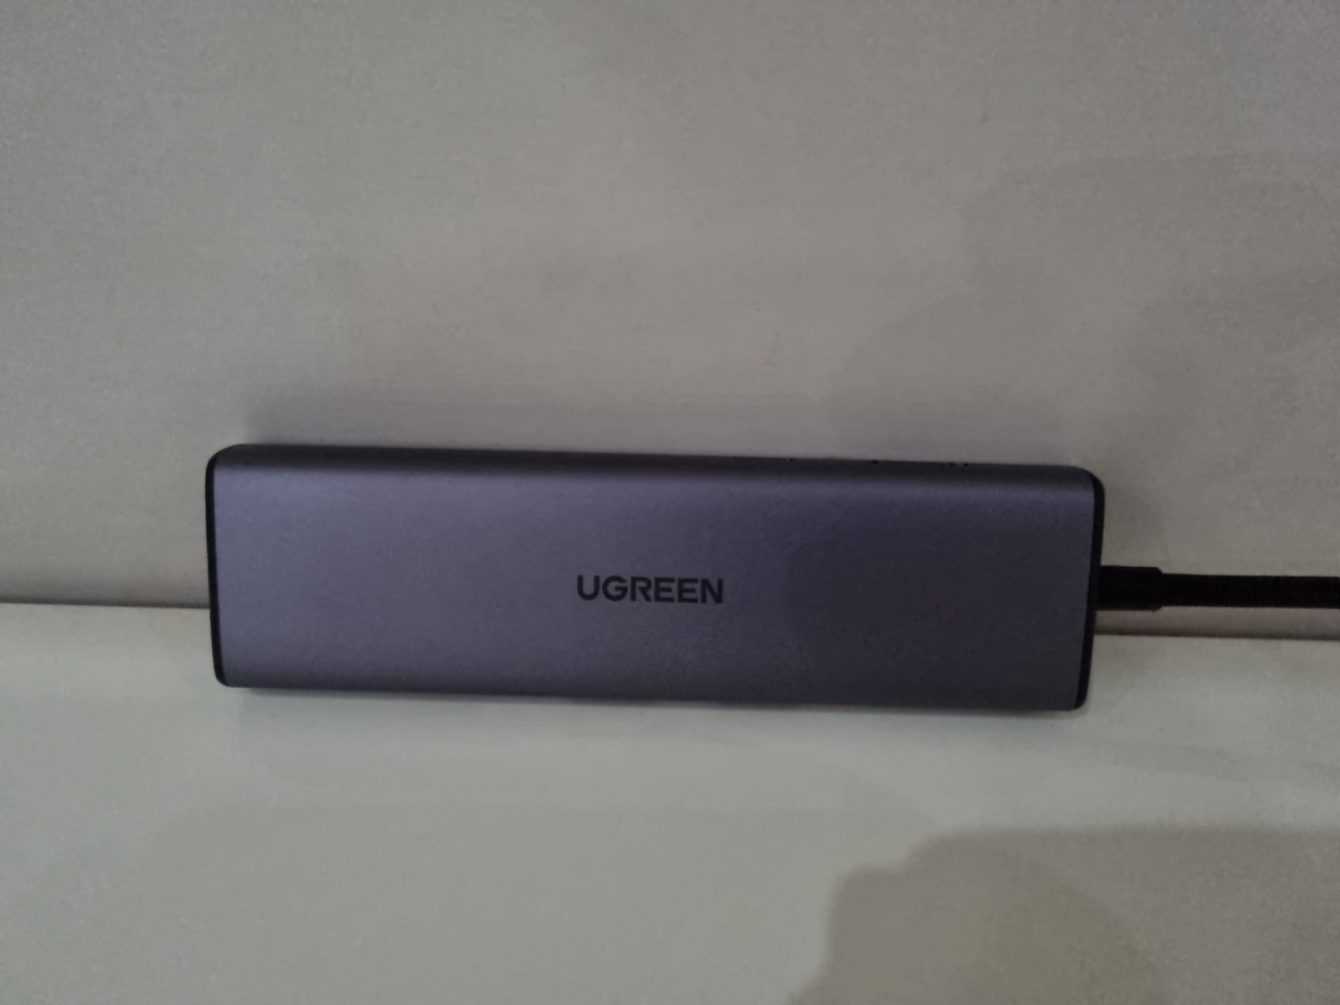 Review Ugreen USB-C Multifunction Adapter: 7 choices in 1 device